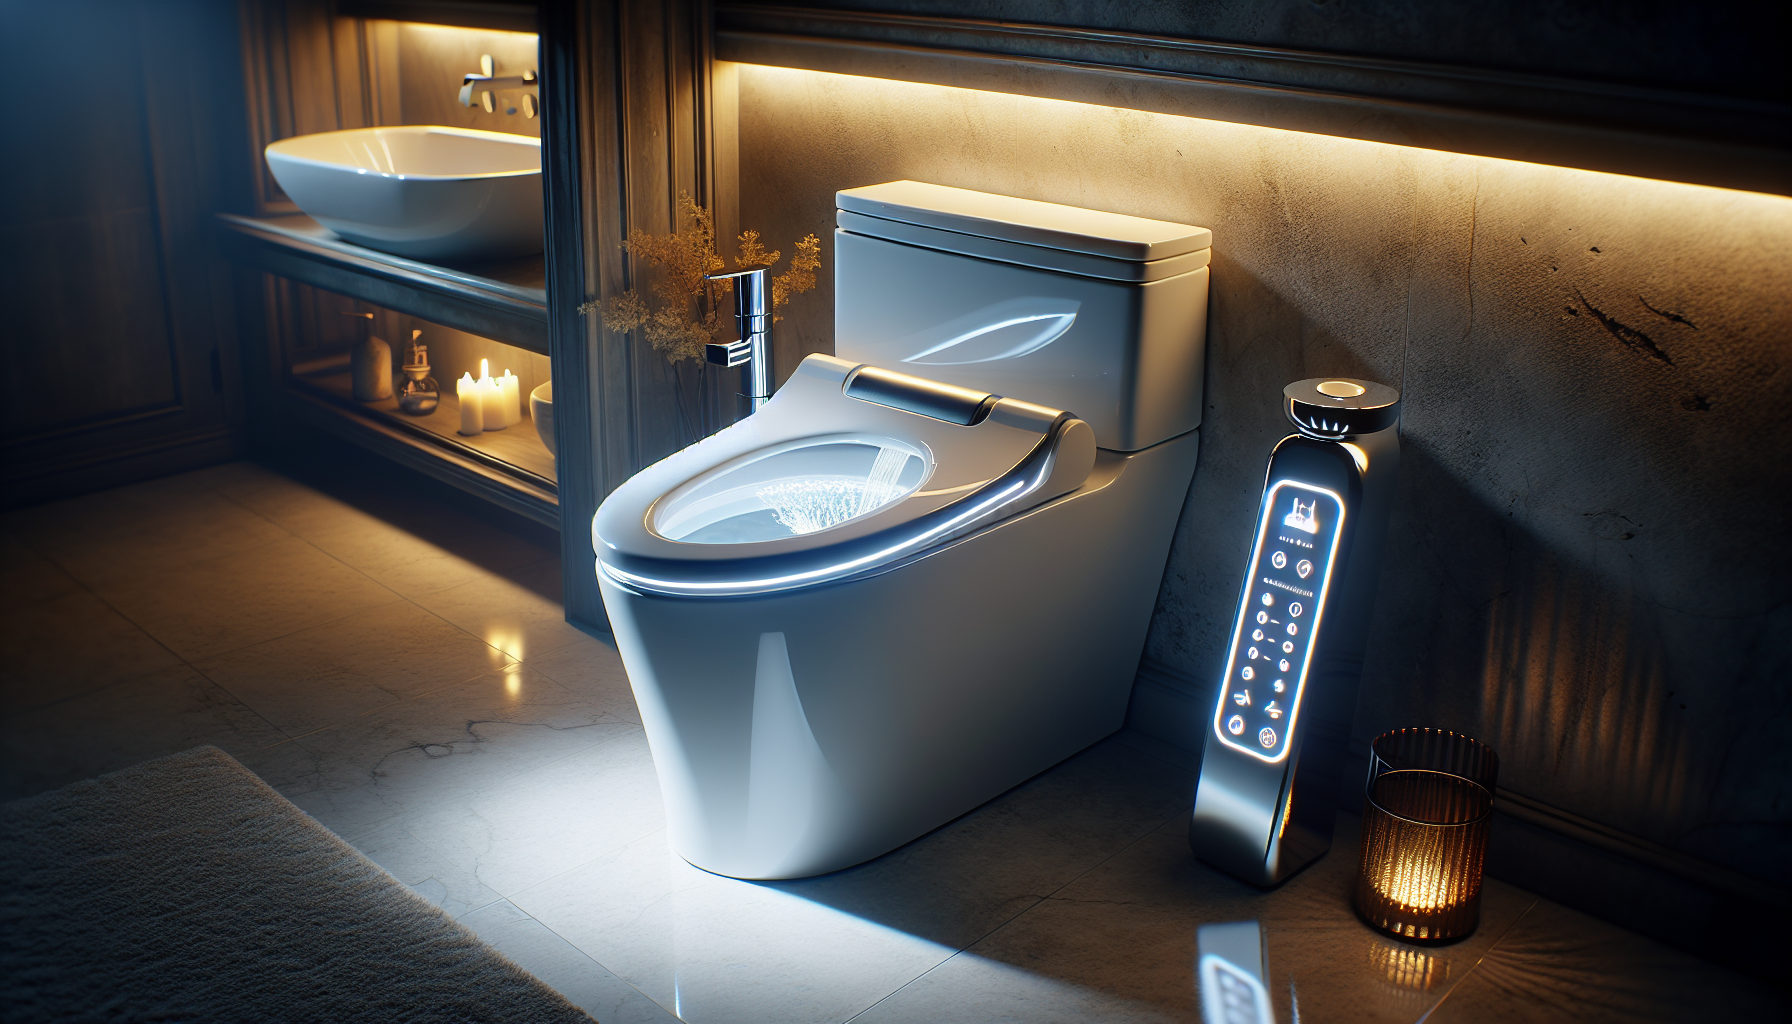 Illustration of an innovative smart toilet with built-in bidet